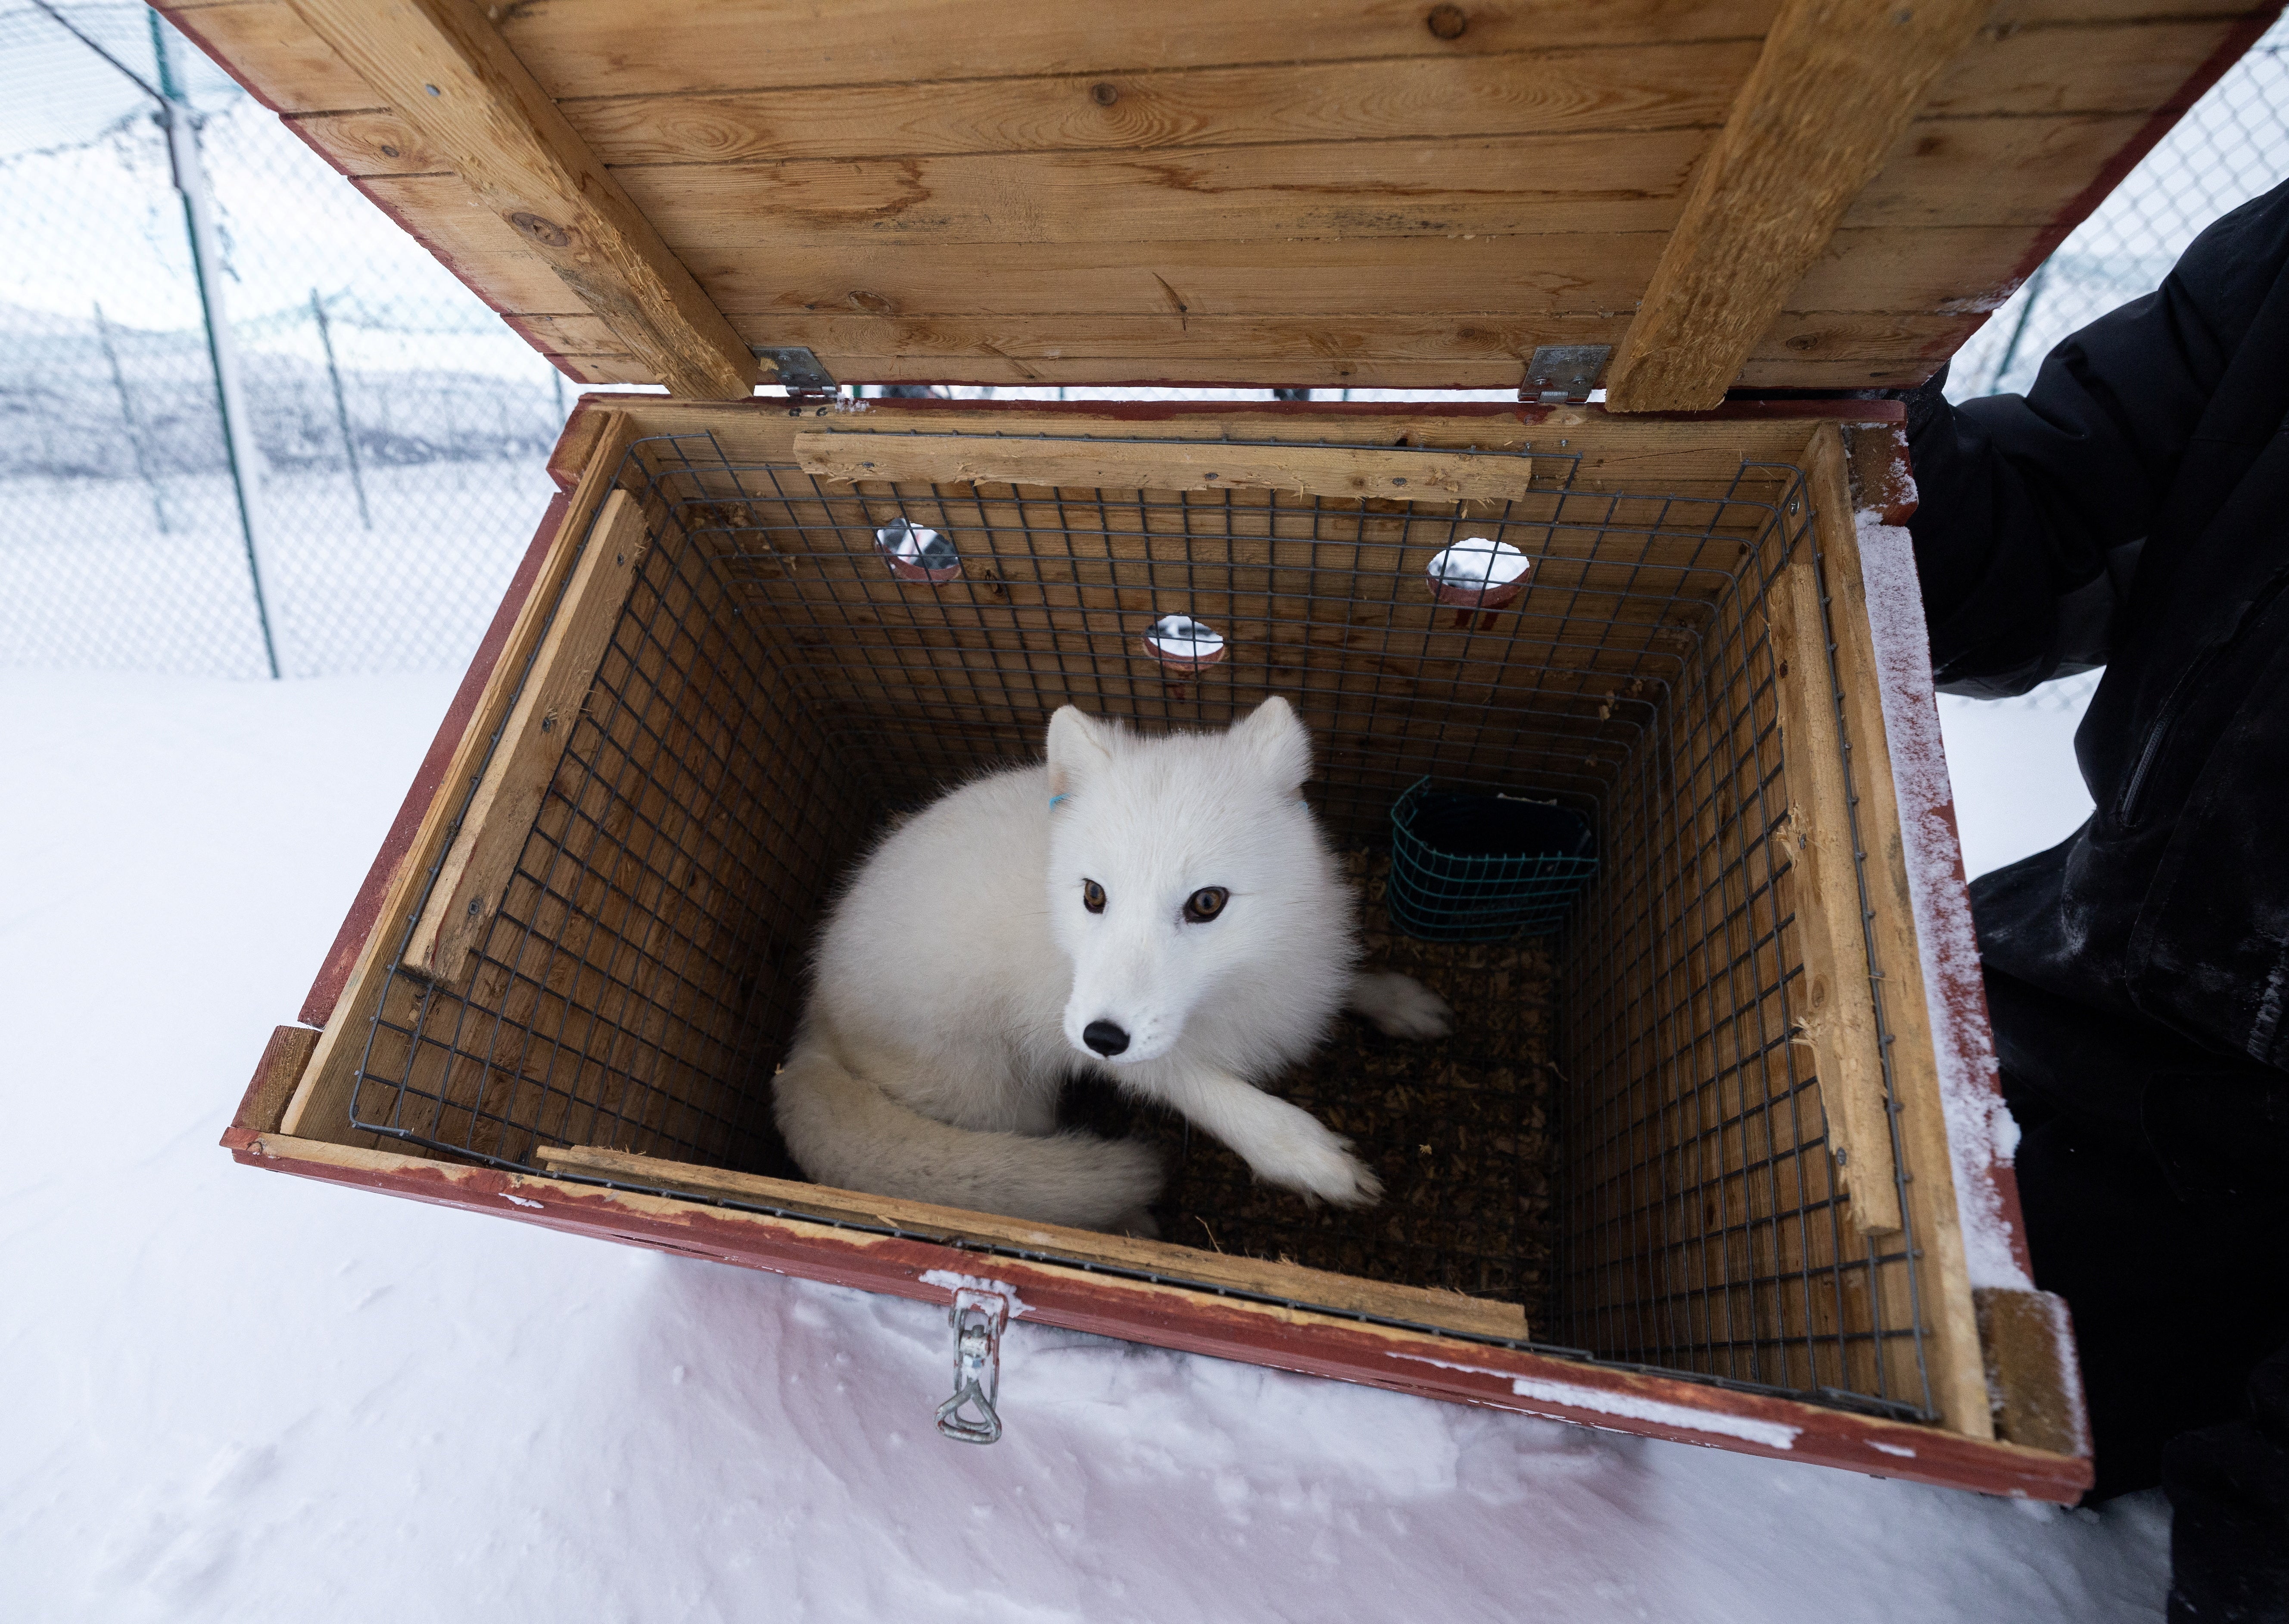 A male white Arctic fox sits inside a wooden box as it arrives back at an enclosure